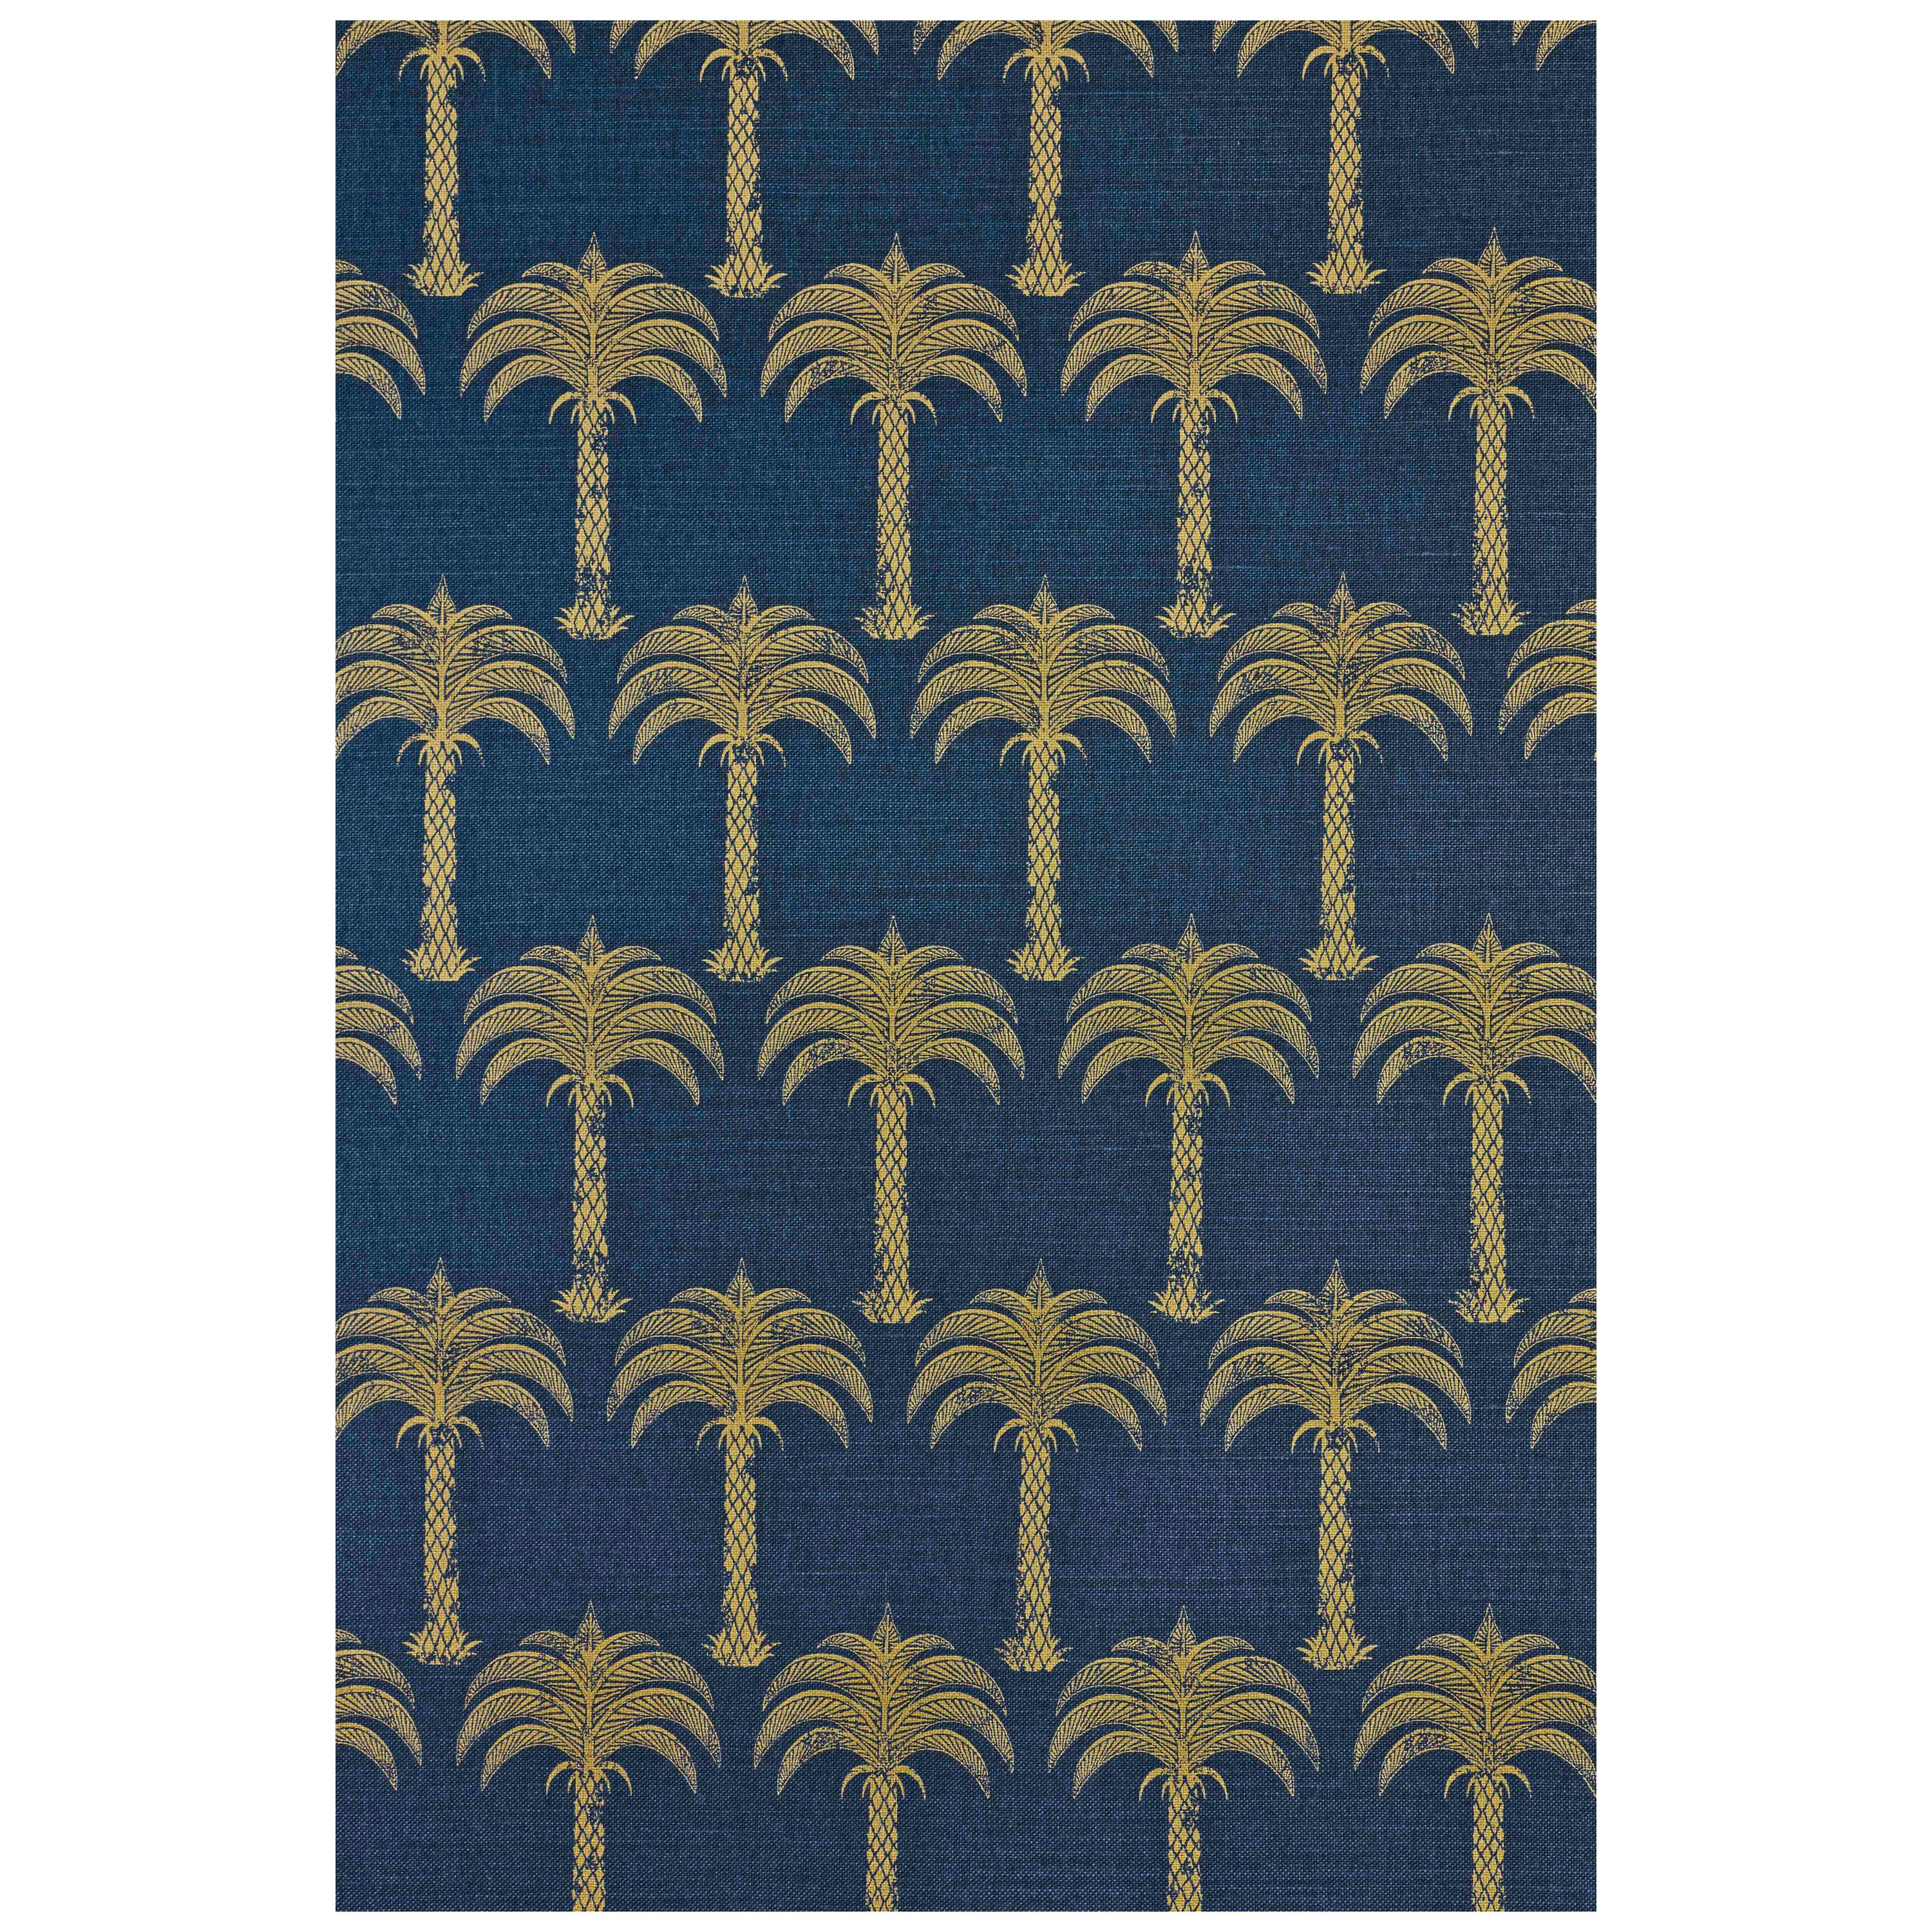 'Marrakech Palm' Contemporary, Traditional Fabric in Midnight Blue For Sale